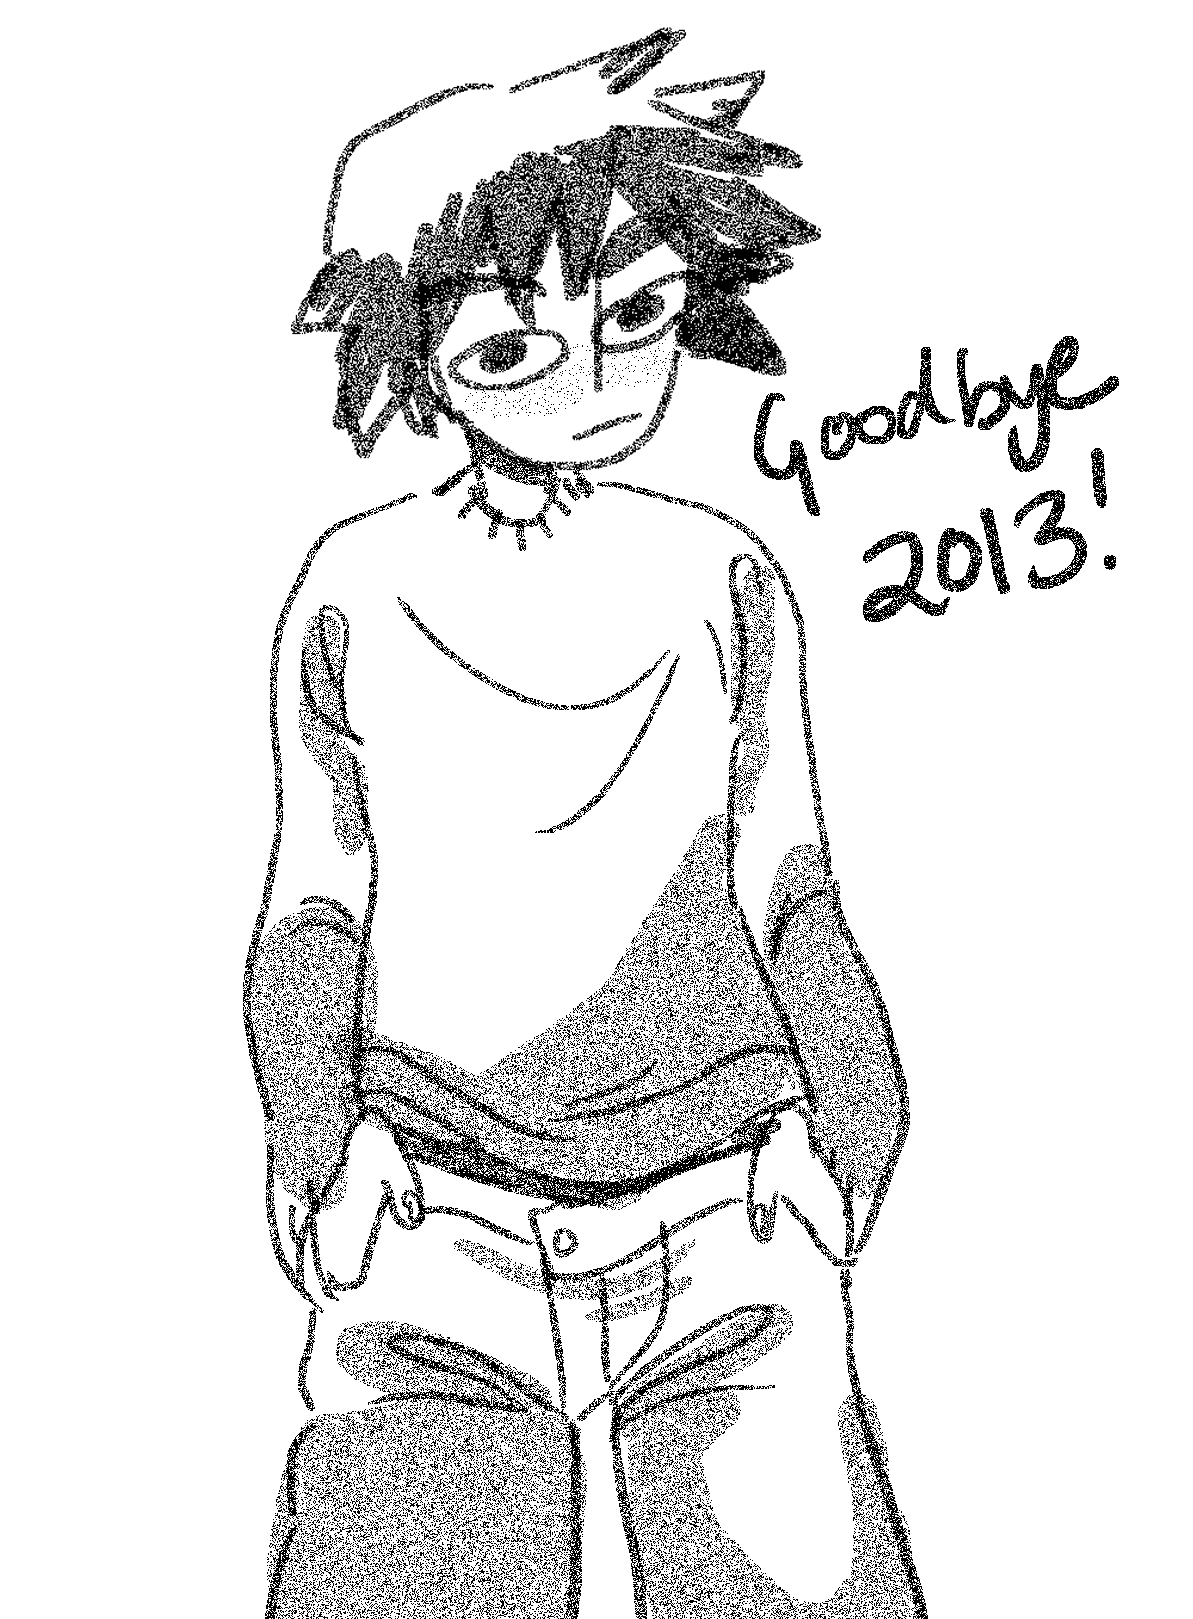 at first i wanted to make my last drawing for 2013 a special one. but i got so cooped